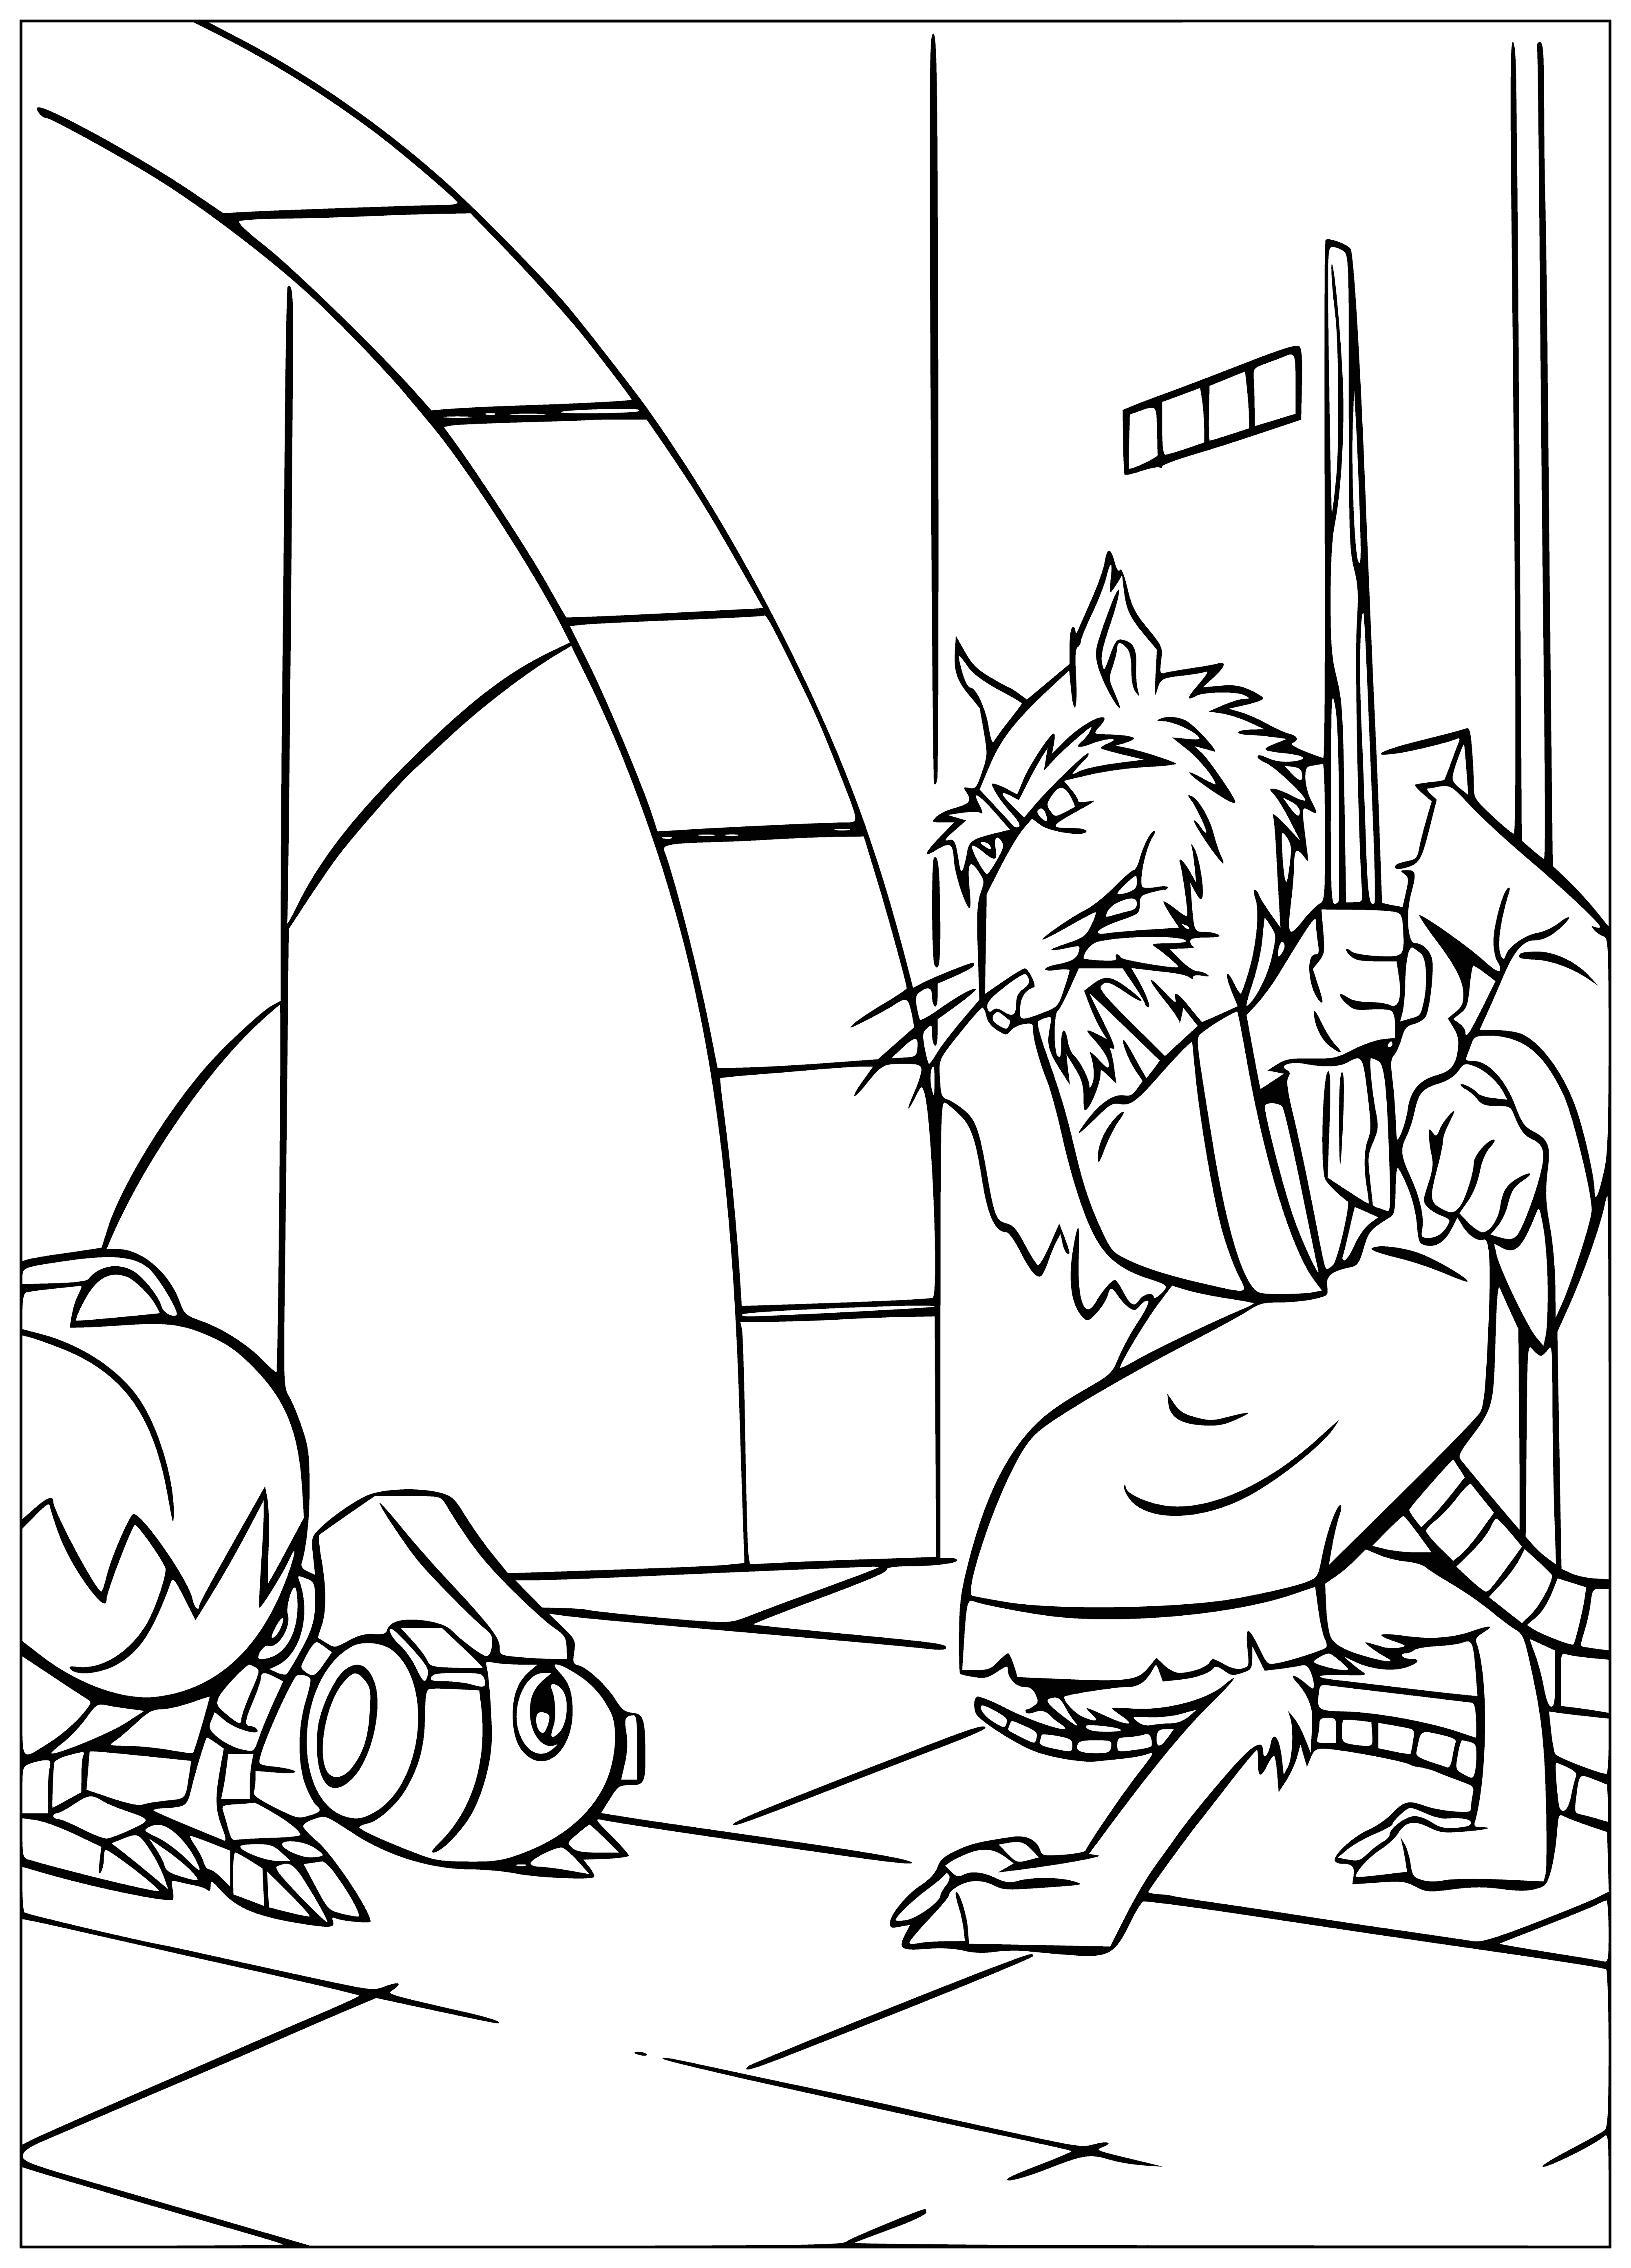 coloring page: 4 turtles, rat wearing masks, diff colored bandanas, 2 with knives & 1 with nunchucks, rat has staff, standing in front of metal gate. #coloringsheet